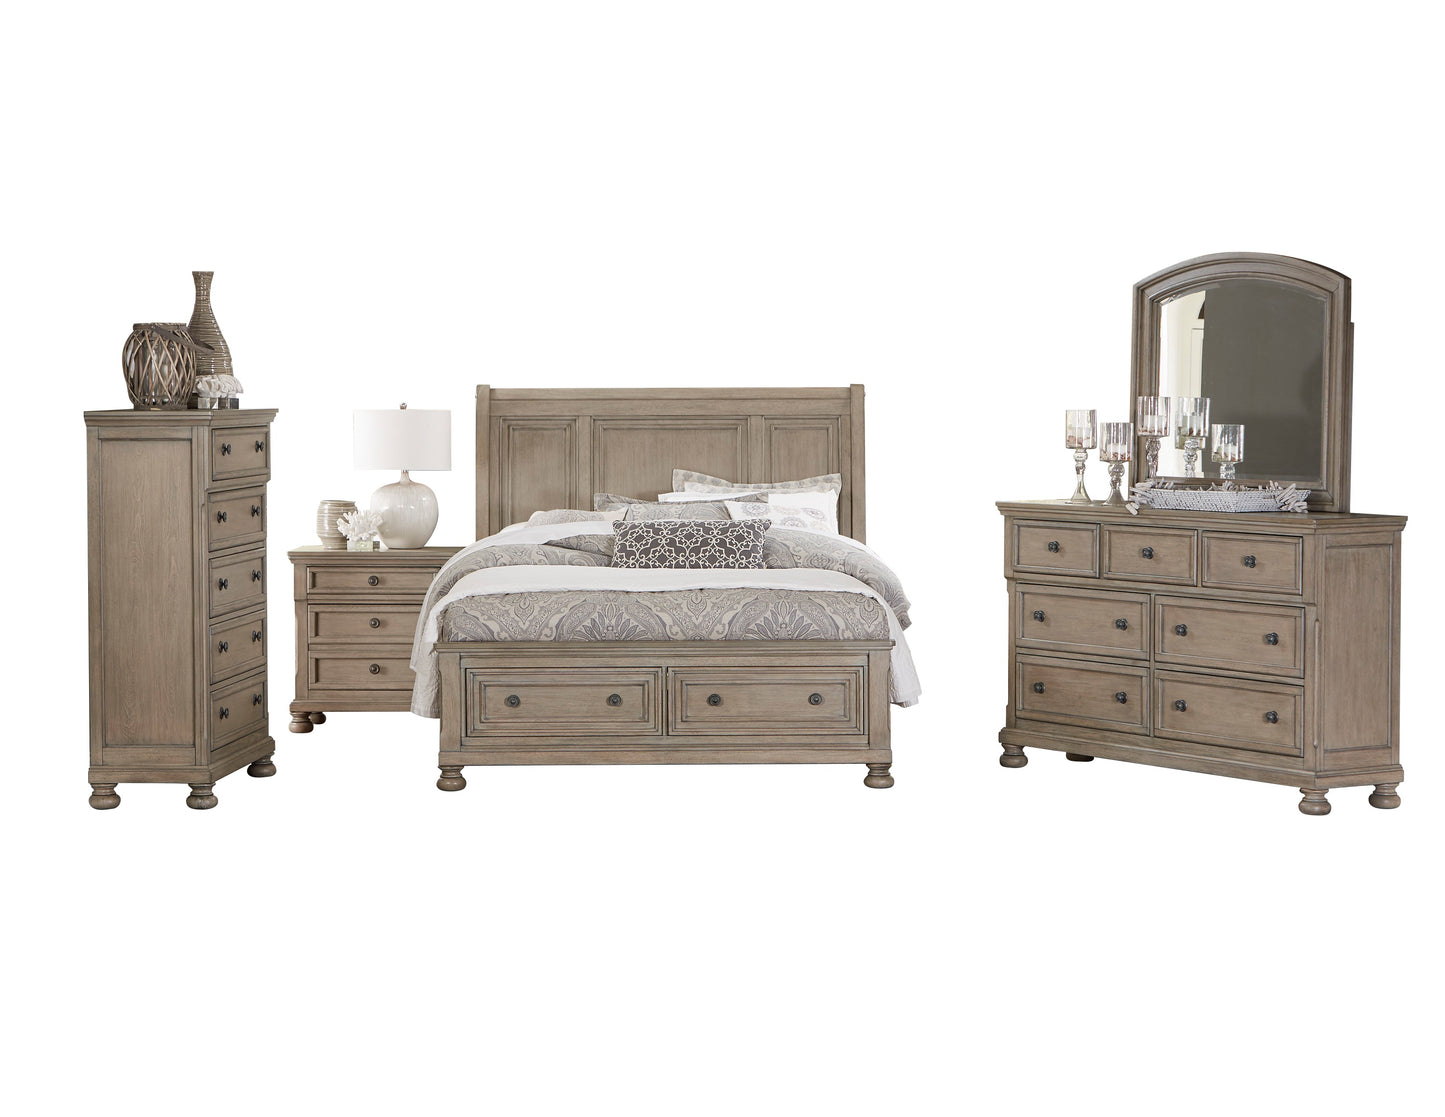 Broville Rustic 5PC Bedroom Set E King Sleigh Storage Bed, Dresser, Mirror, Nightstand, Chest in Weathered Wood